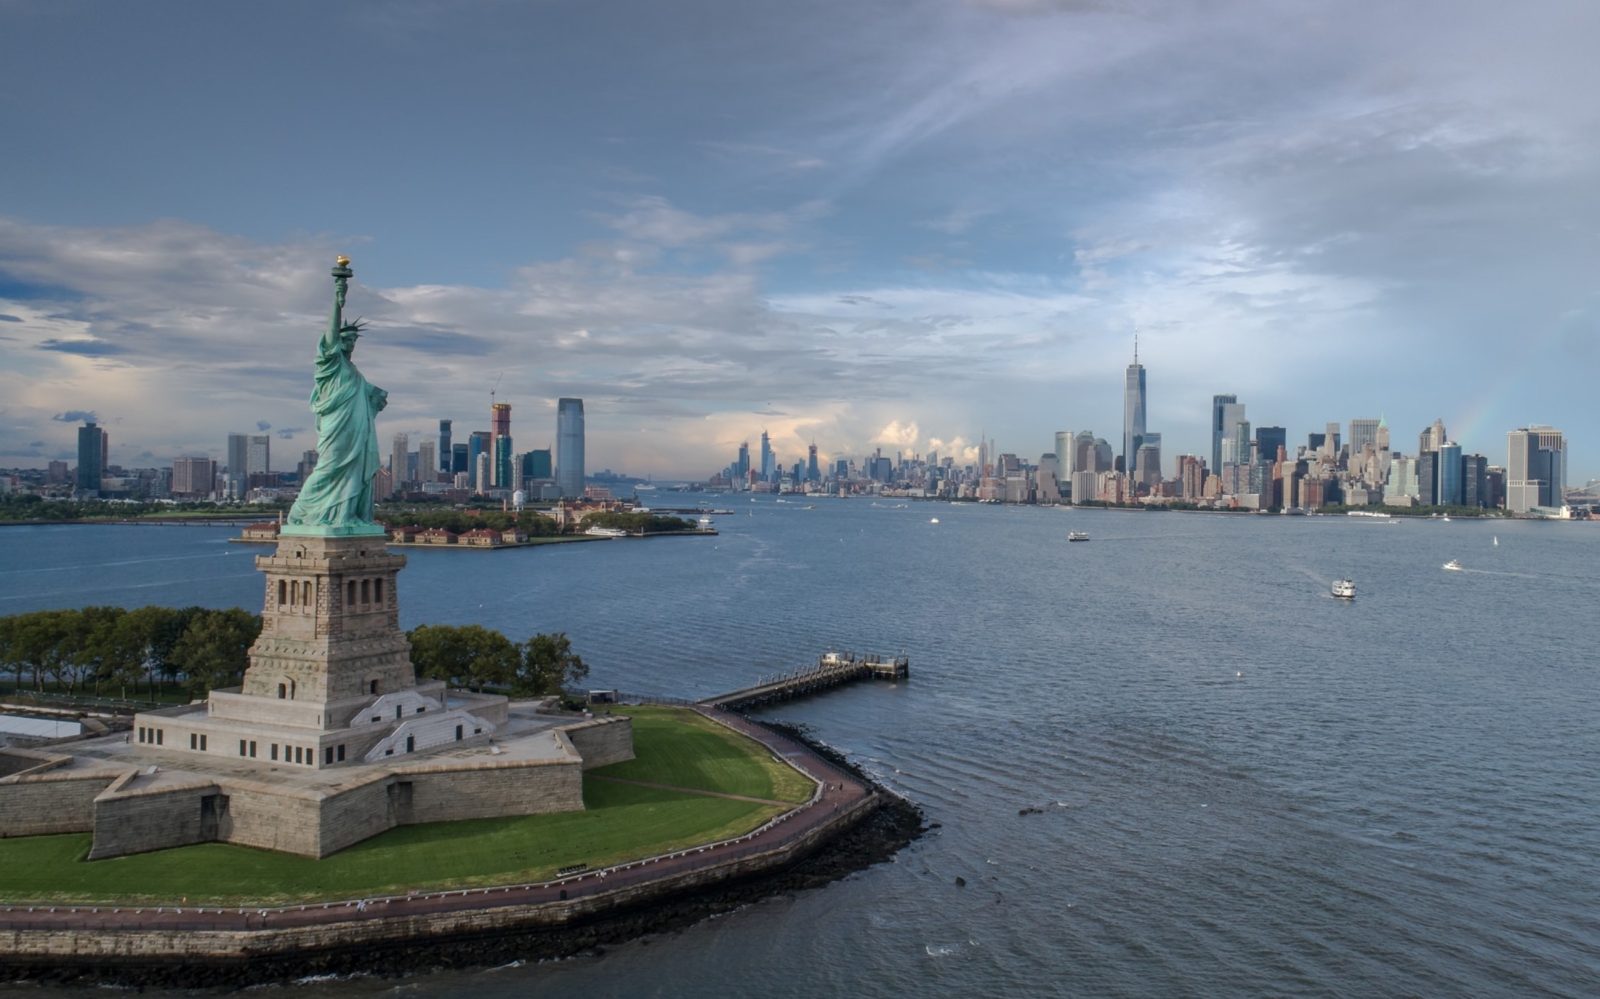 NYPD search for drone spotted 'near' Statue of Liberty